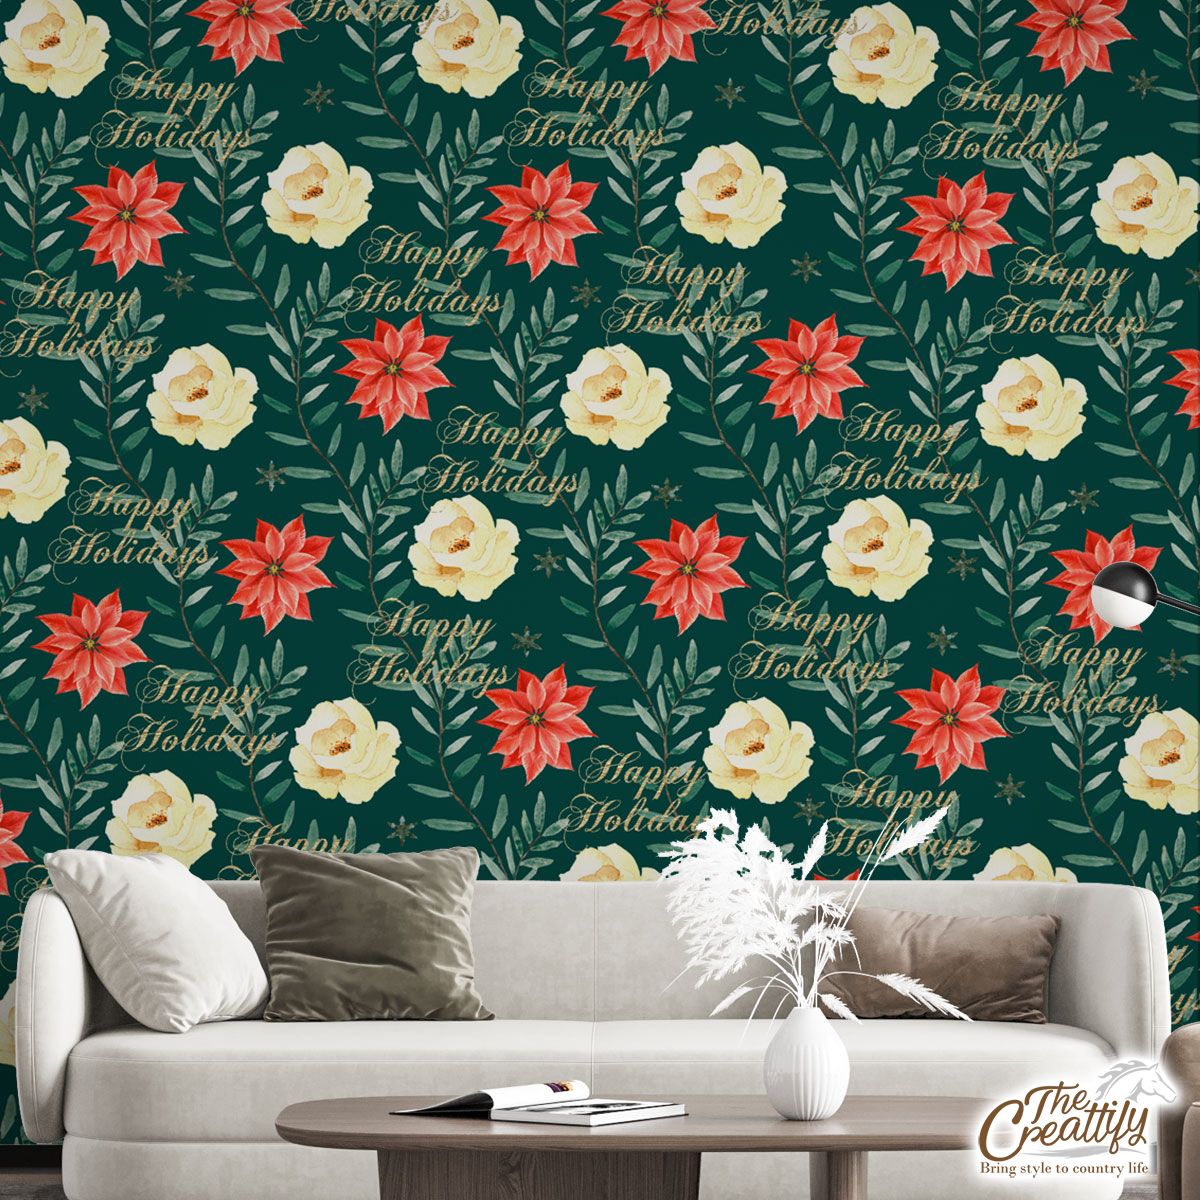 Happy Holidays With Christmas Poinsettia Wall Mural